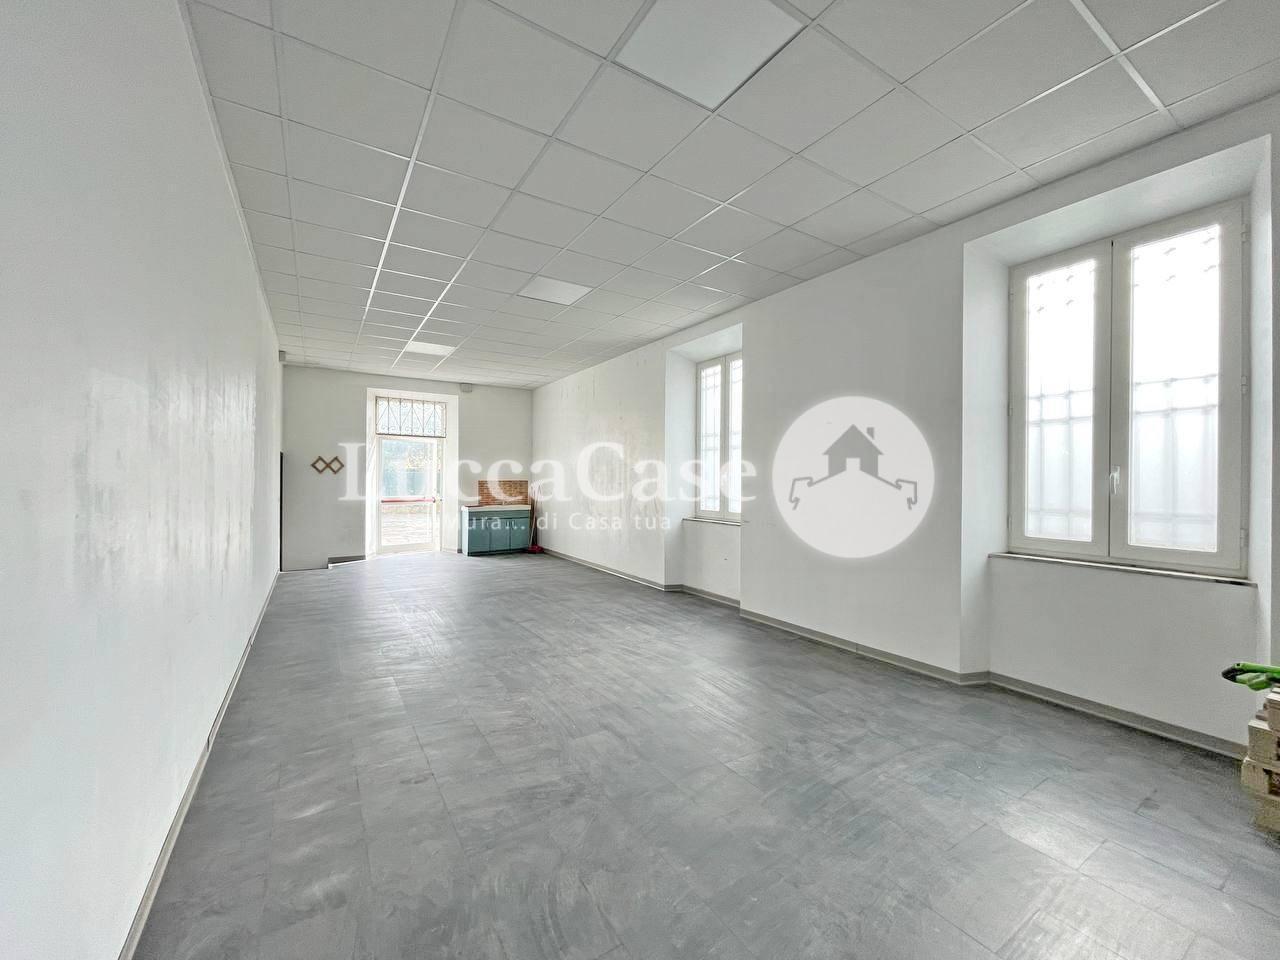 Store for commercial rentals in Lucca